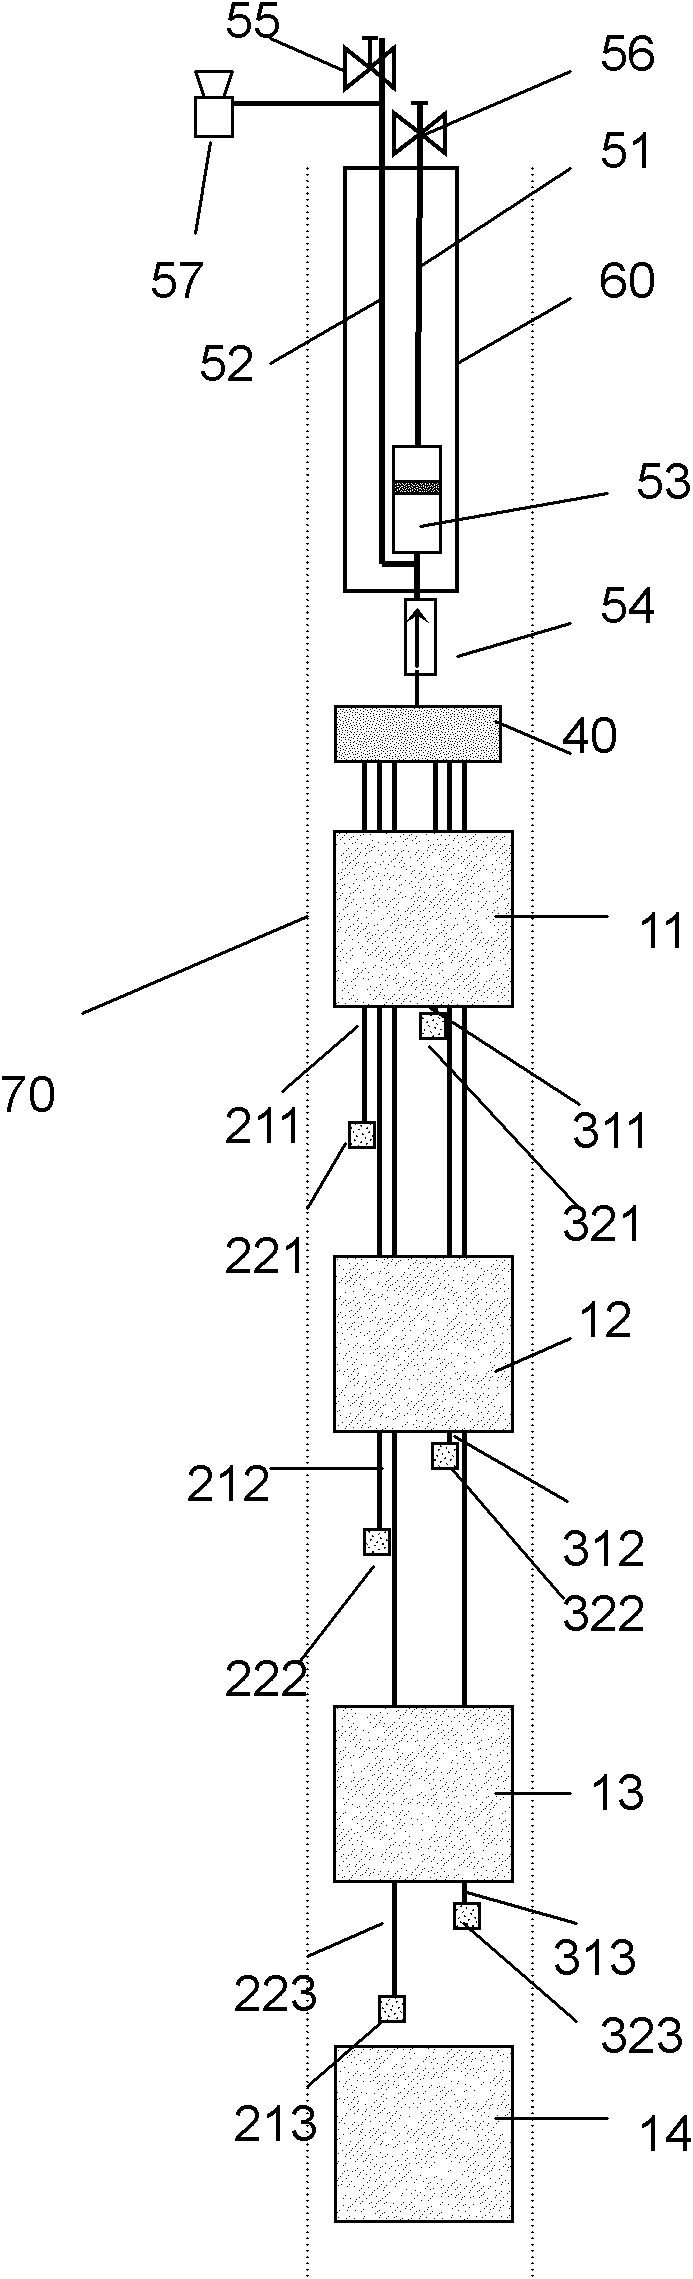 Underground layered gas-liquid two phase fluid pressure and temperature-retaining sampling device